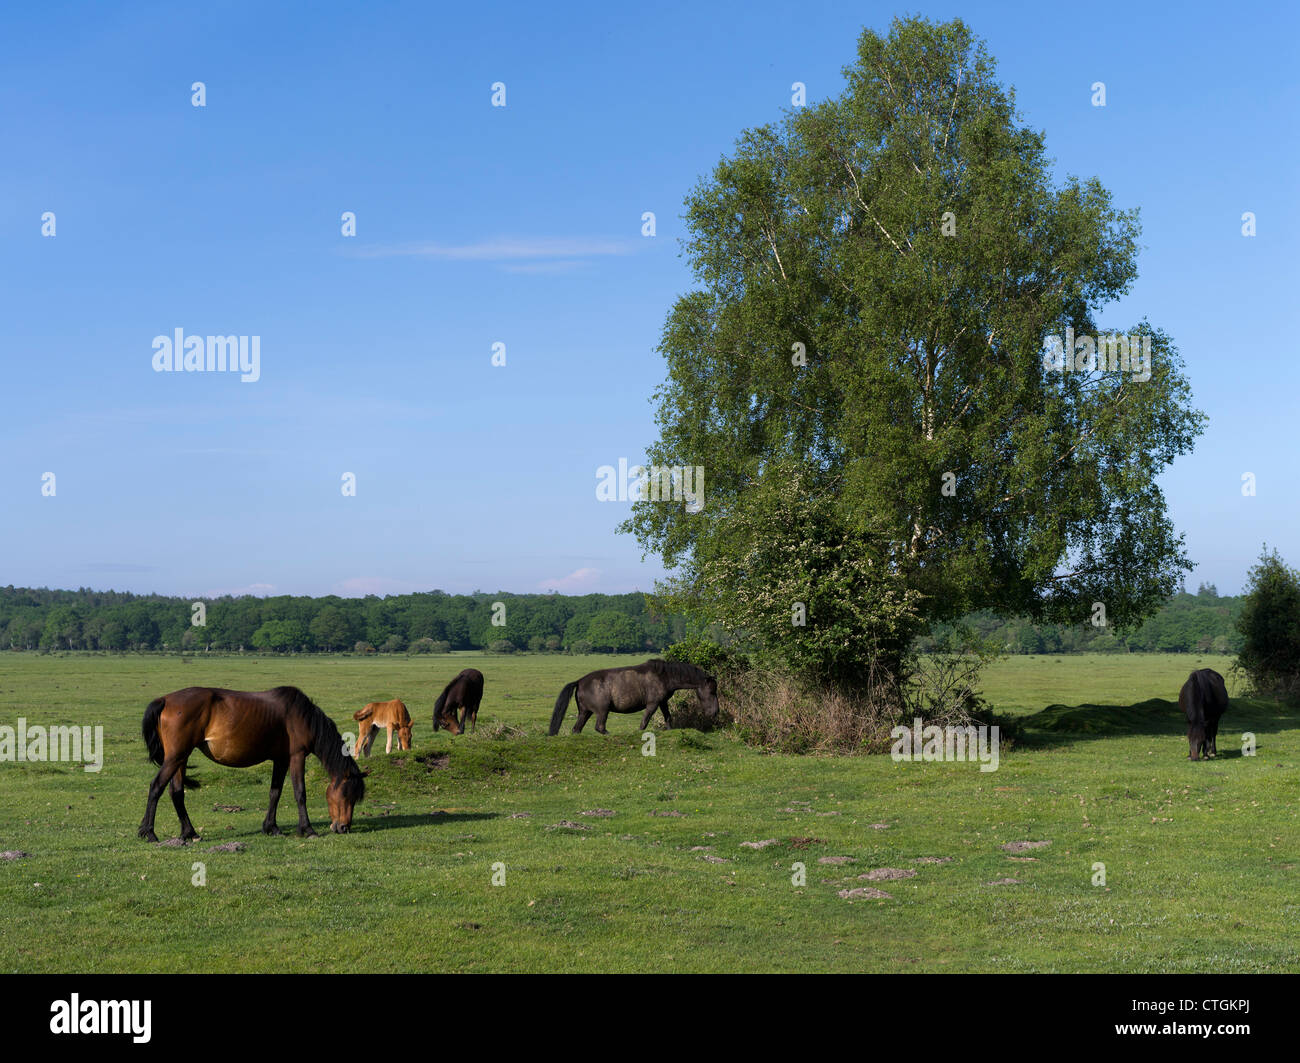 dh  NEW FOREST HAMPSHIRE New Forest pony horses grazing on common land tree england uk ponies countryside Stock Photo